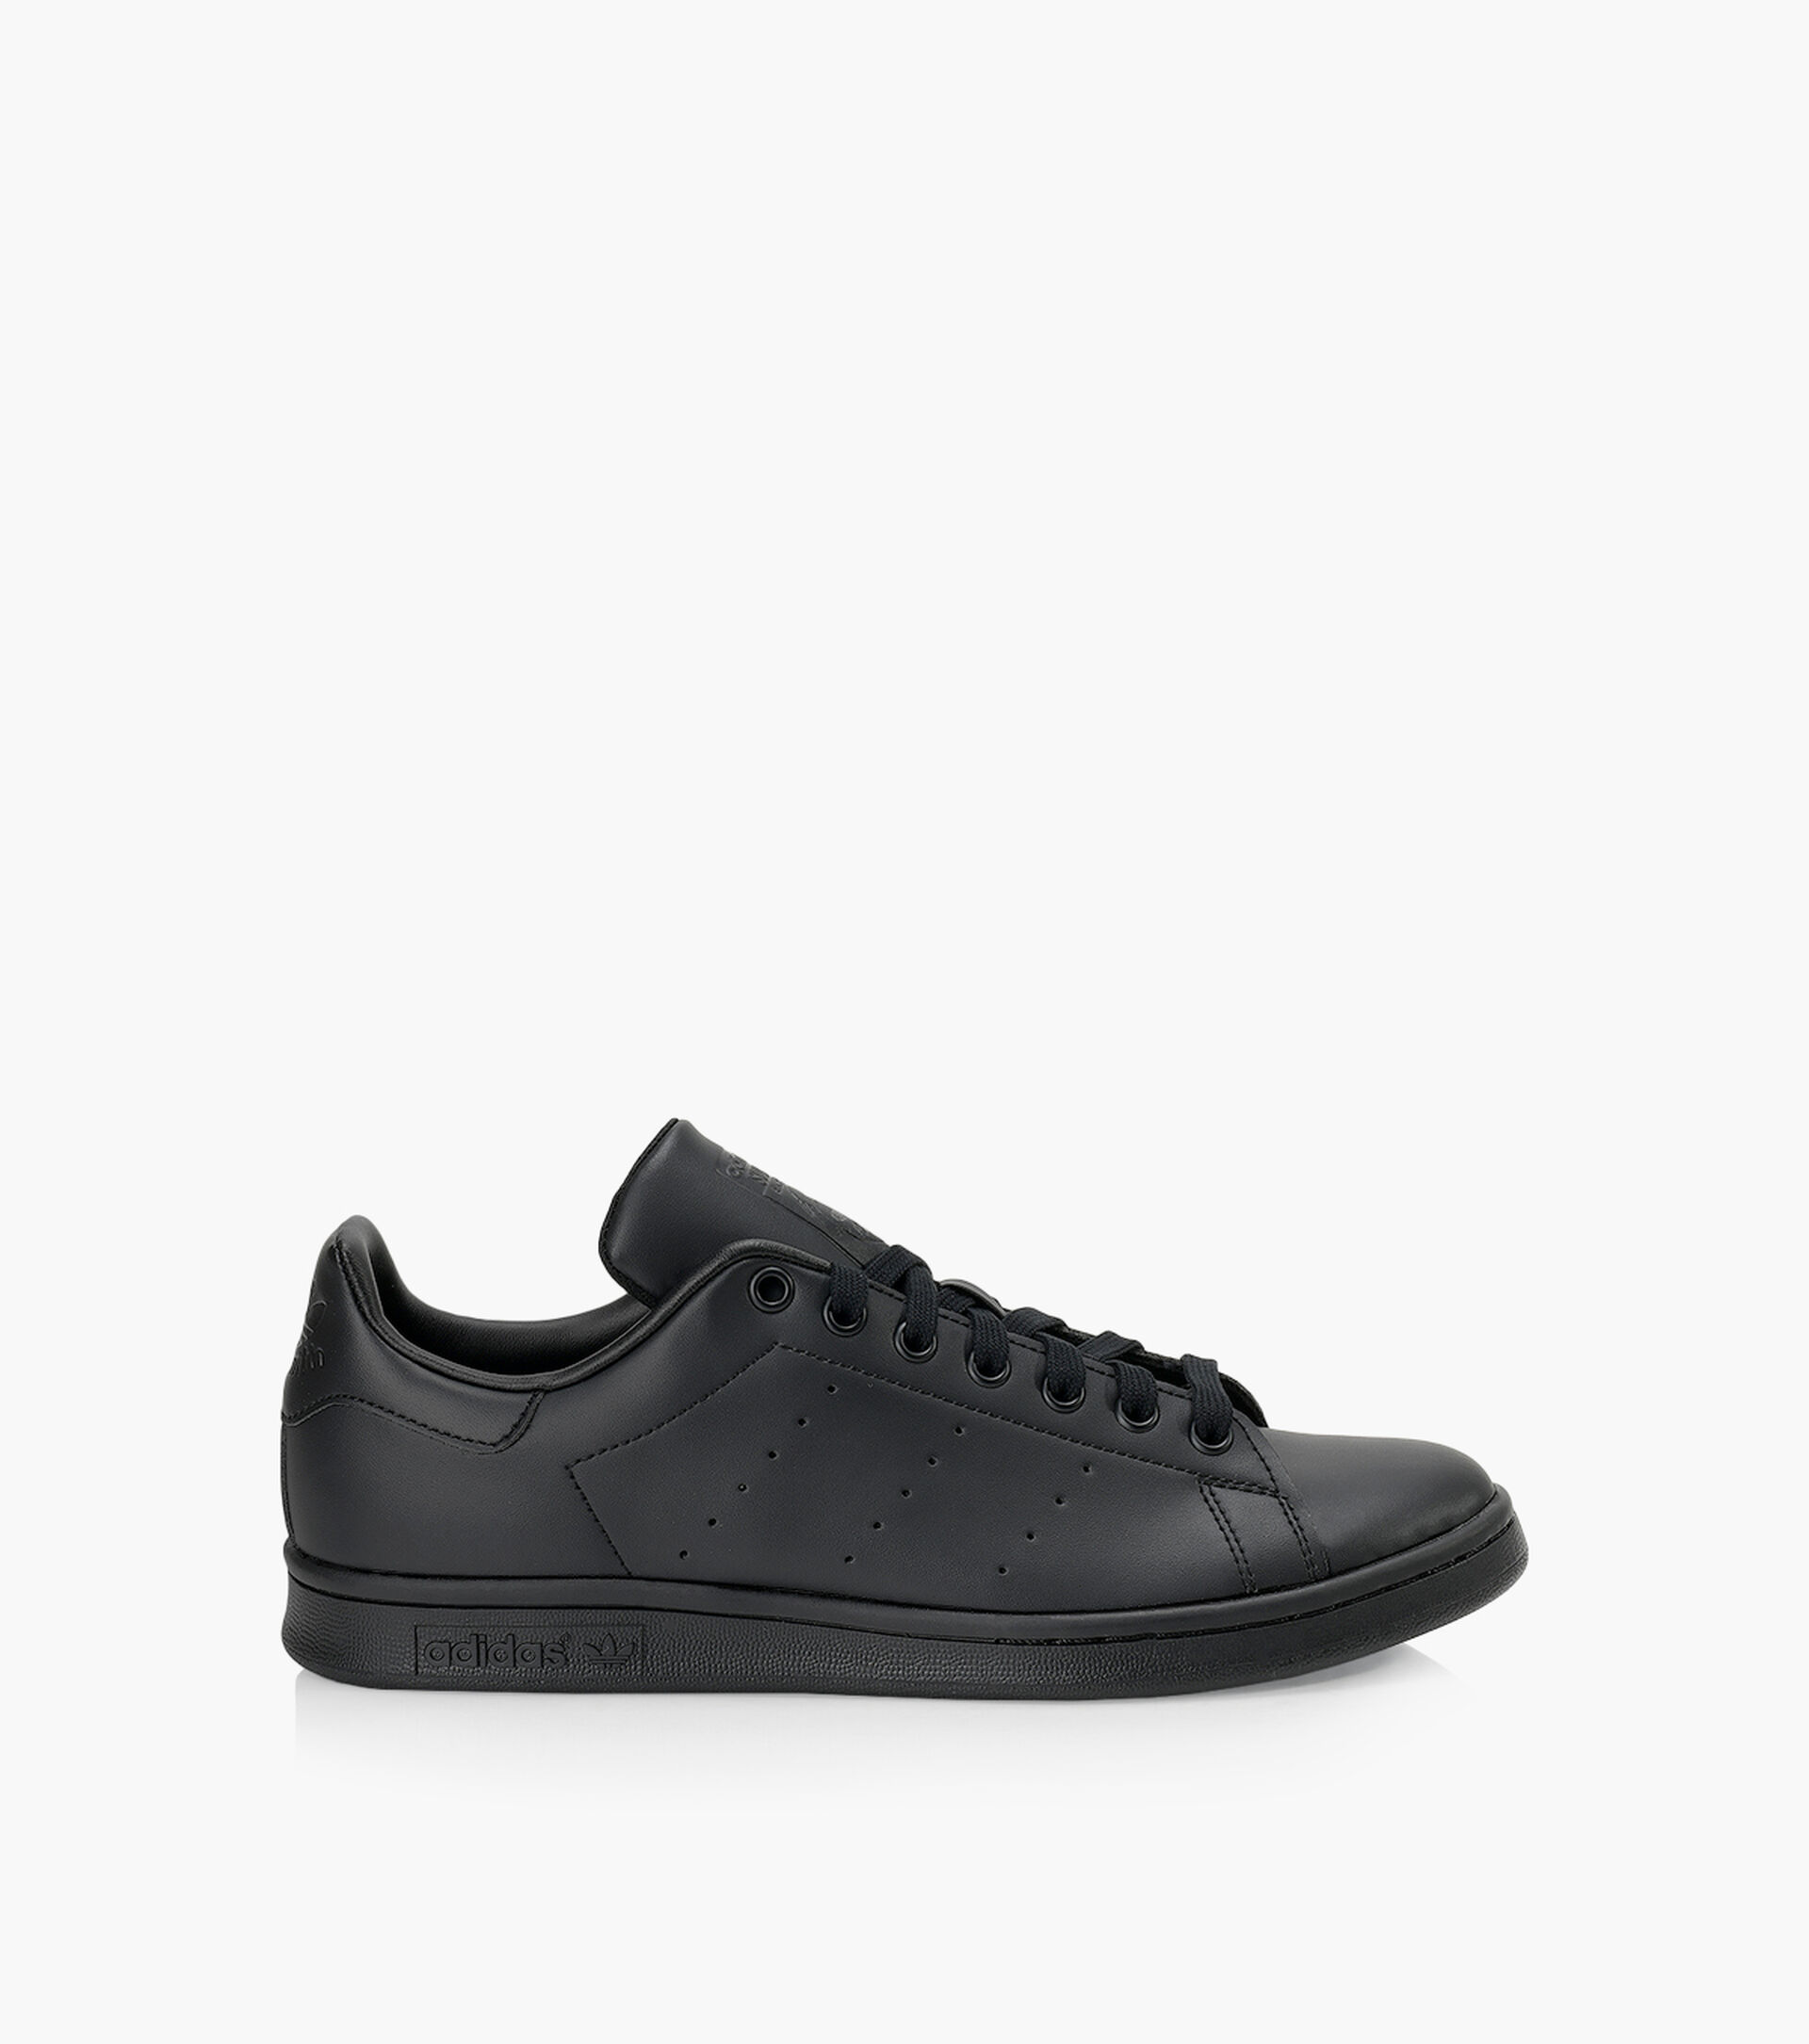 ADIDAS STAN SMITH - Black Leather | Browns Shoes